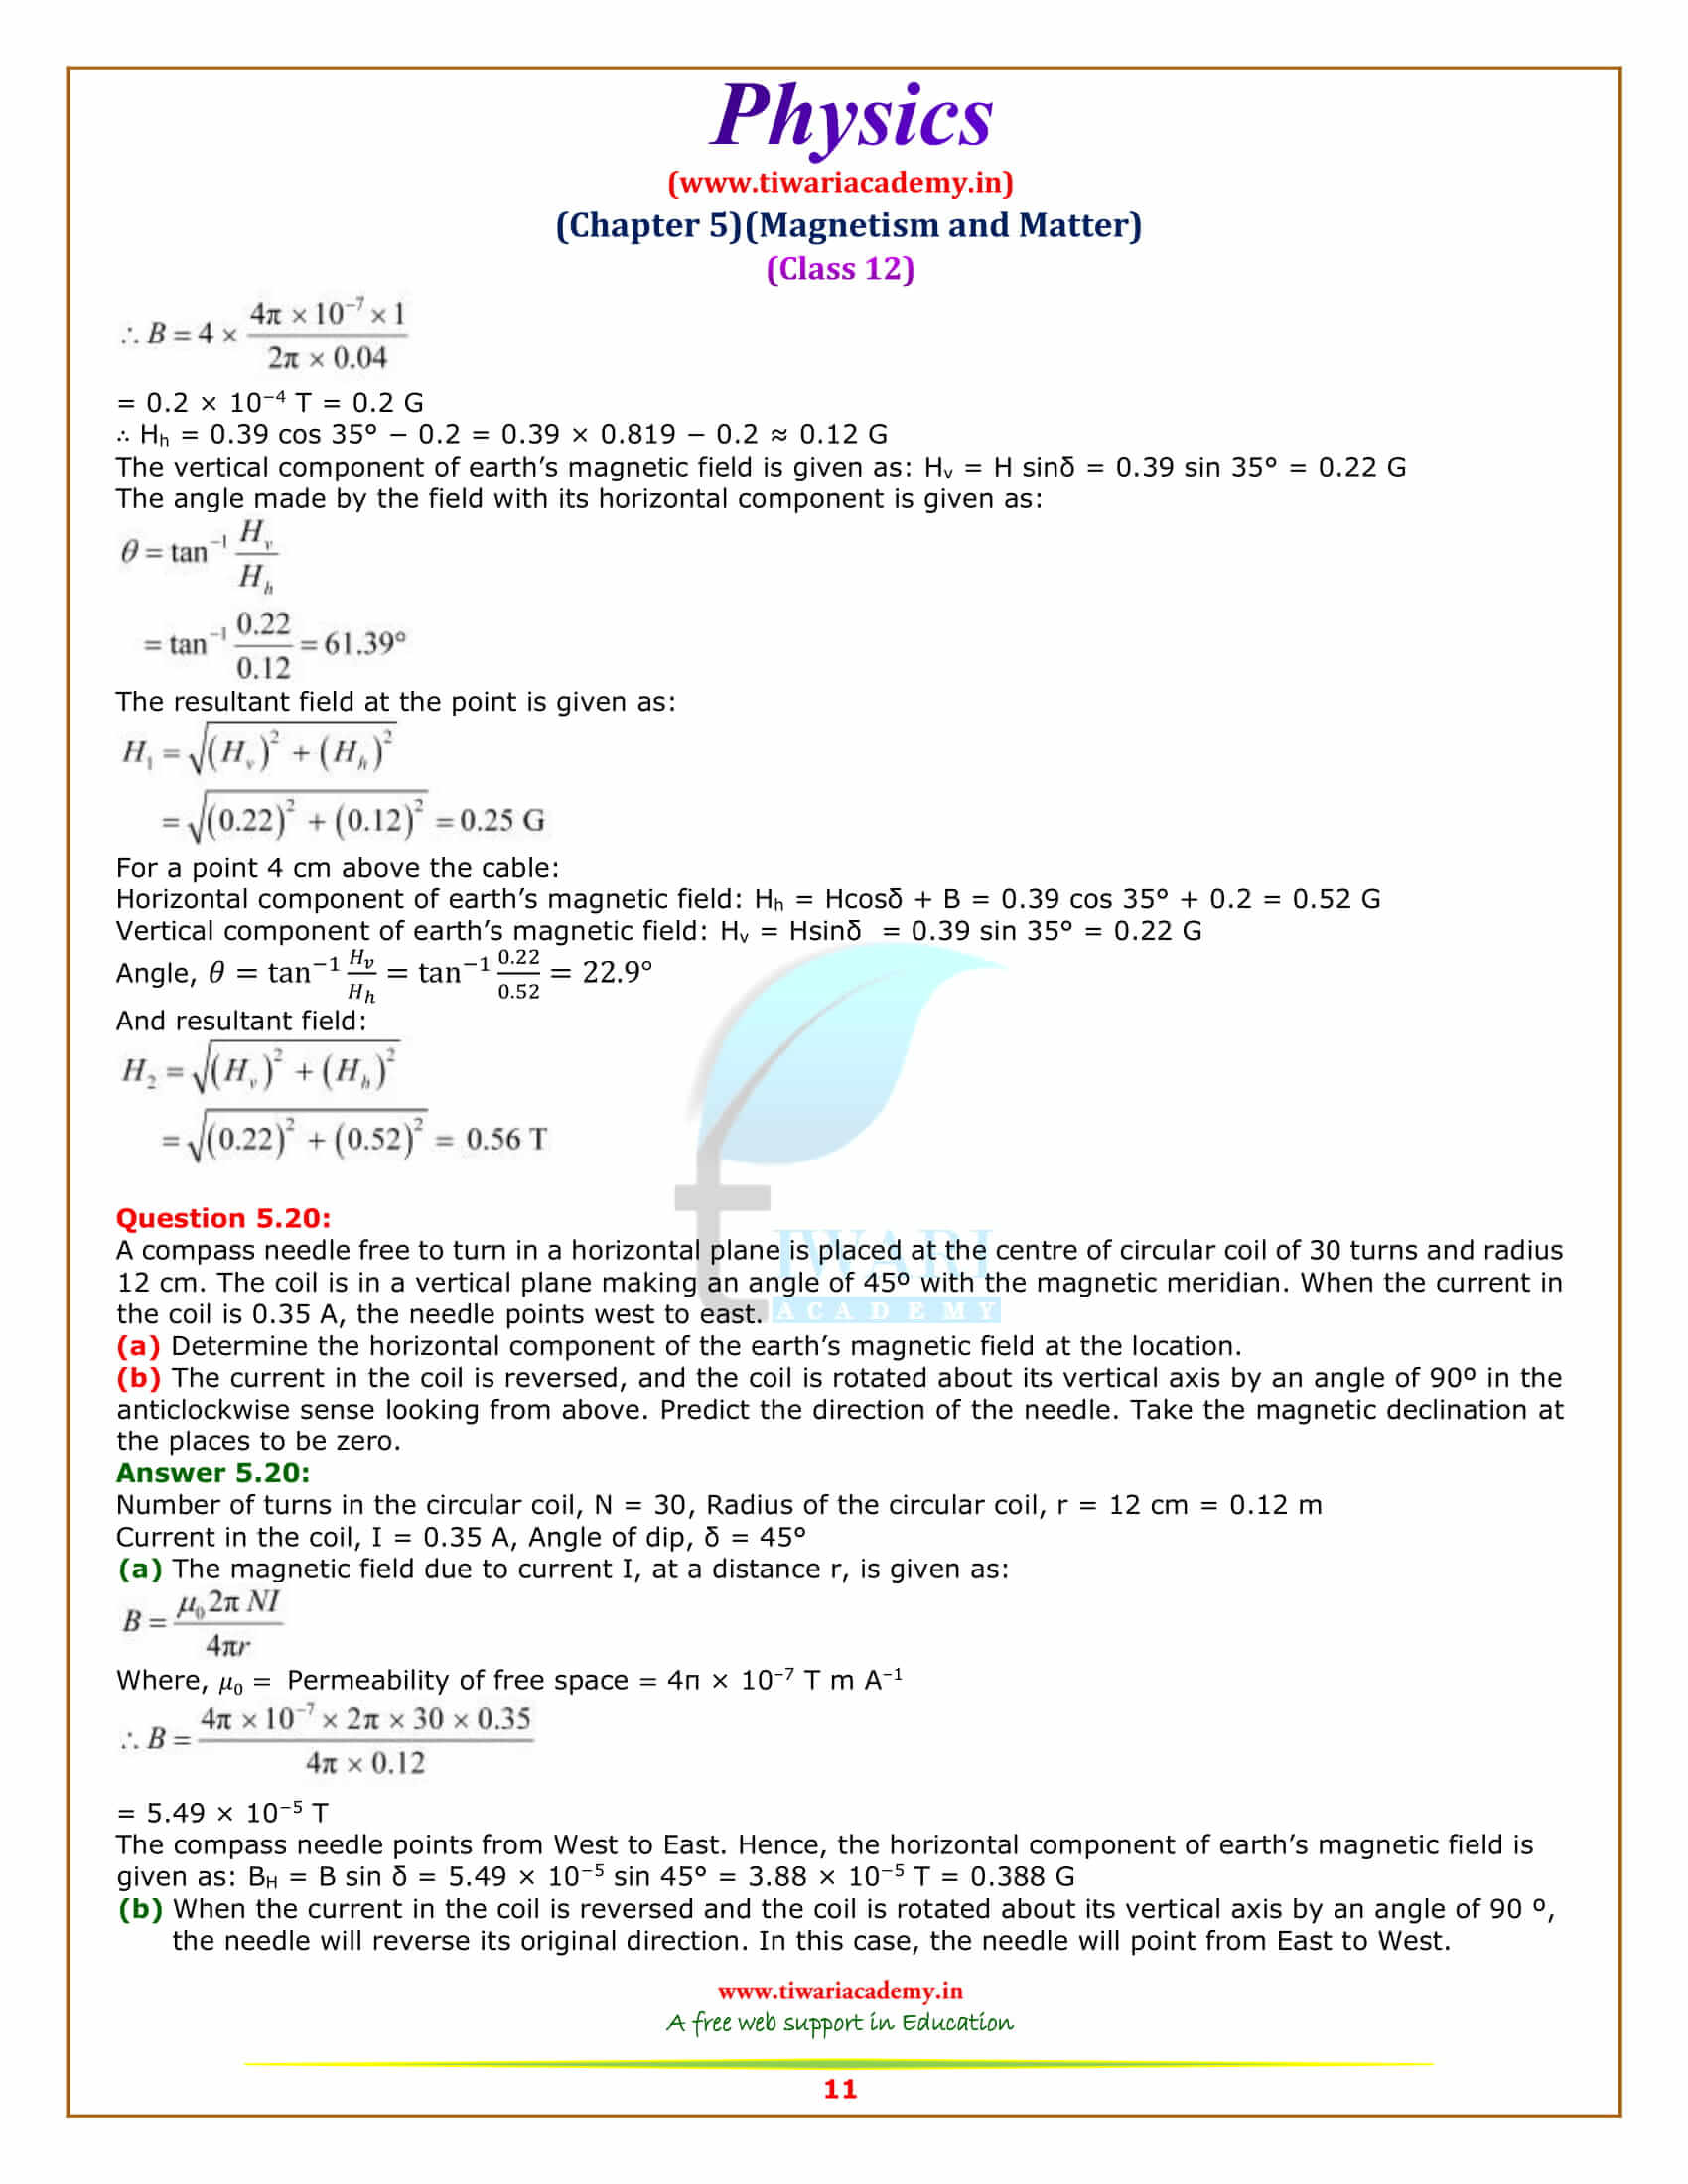 12 Physics Chapter 5 Magnetism and Matter additional exercises question answers in pdf form